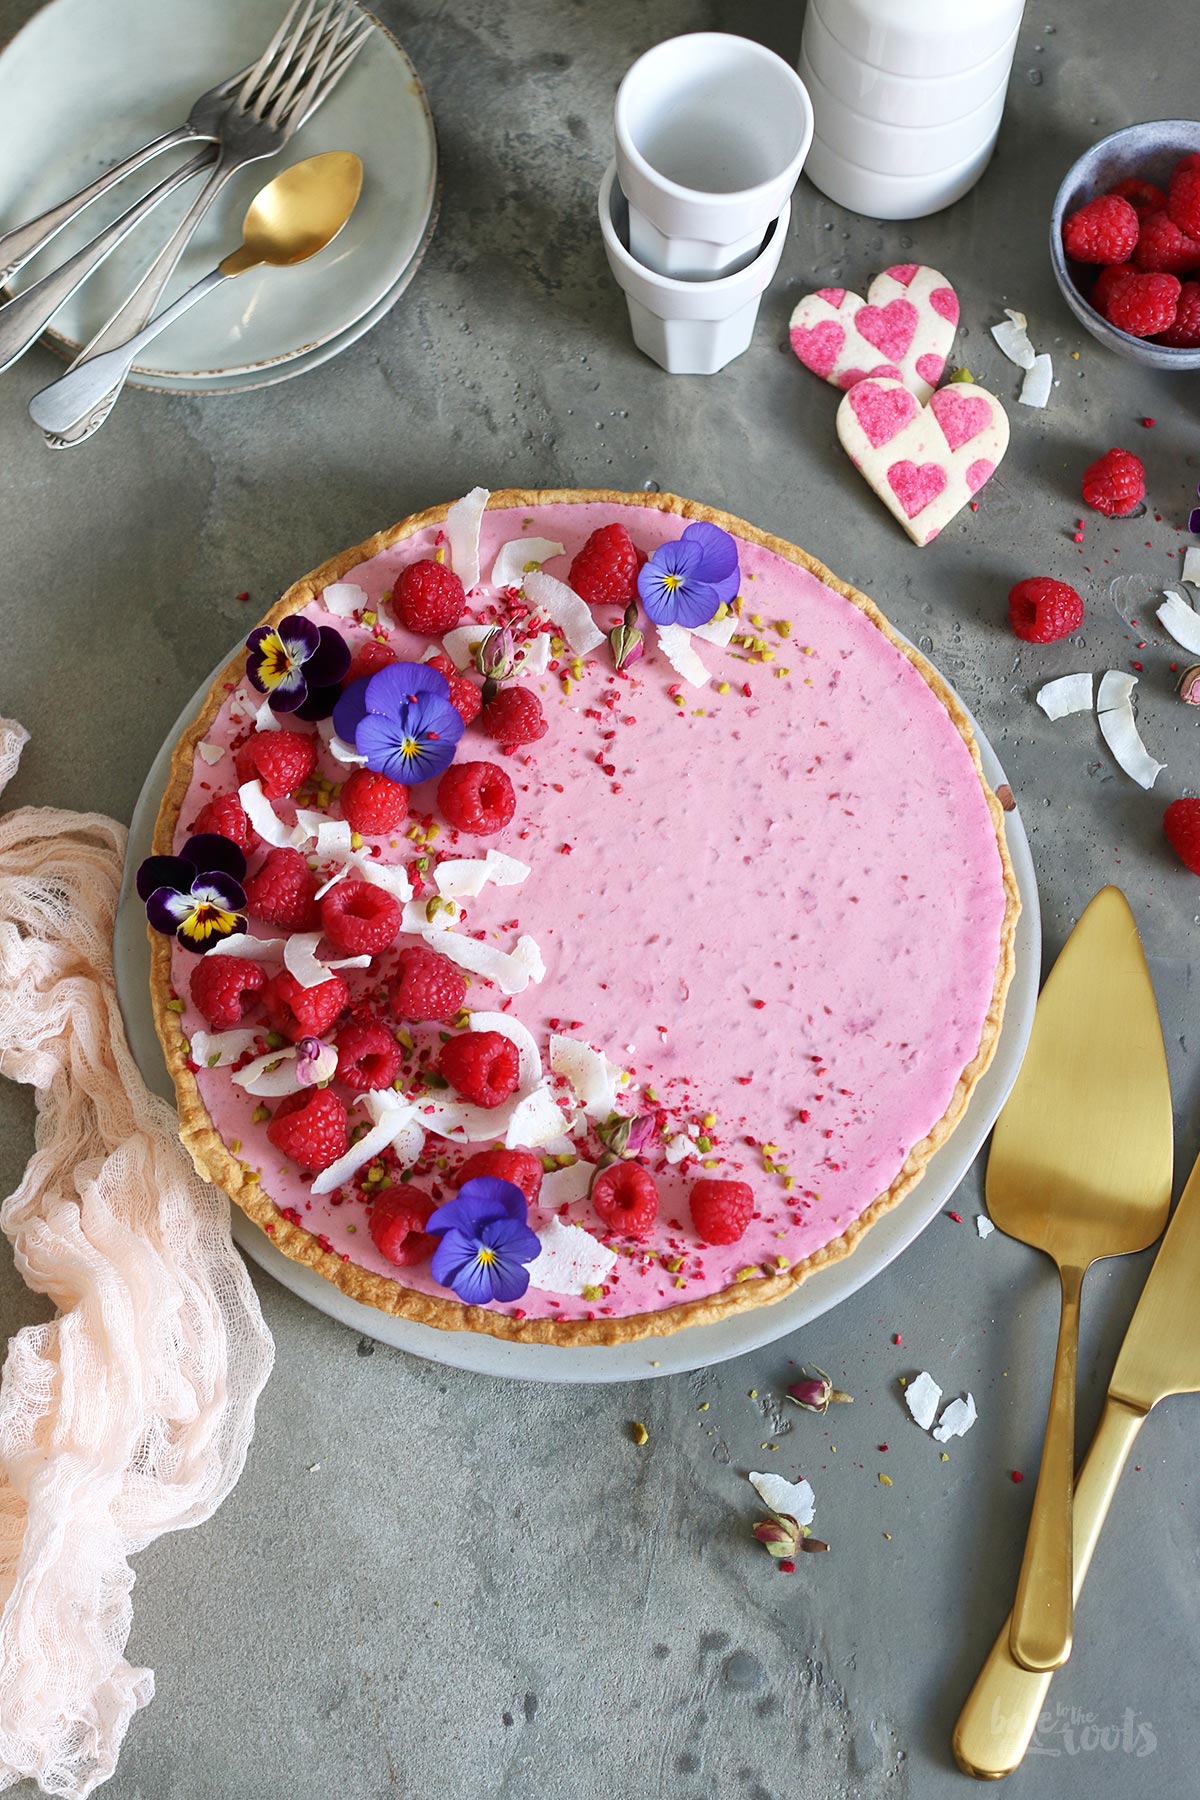 Raspberry Coconut Mousse Tart | Bake to the roots